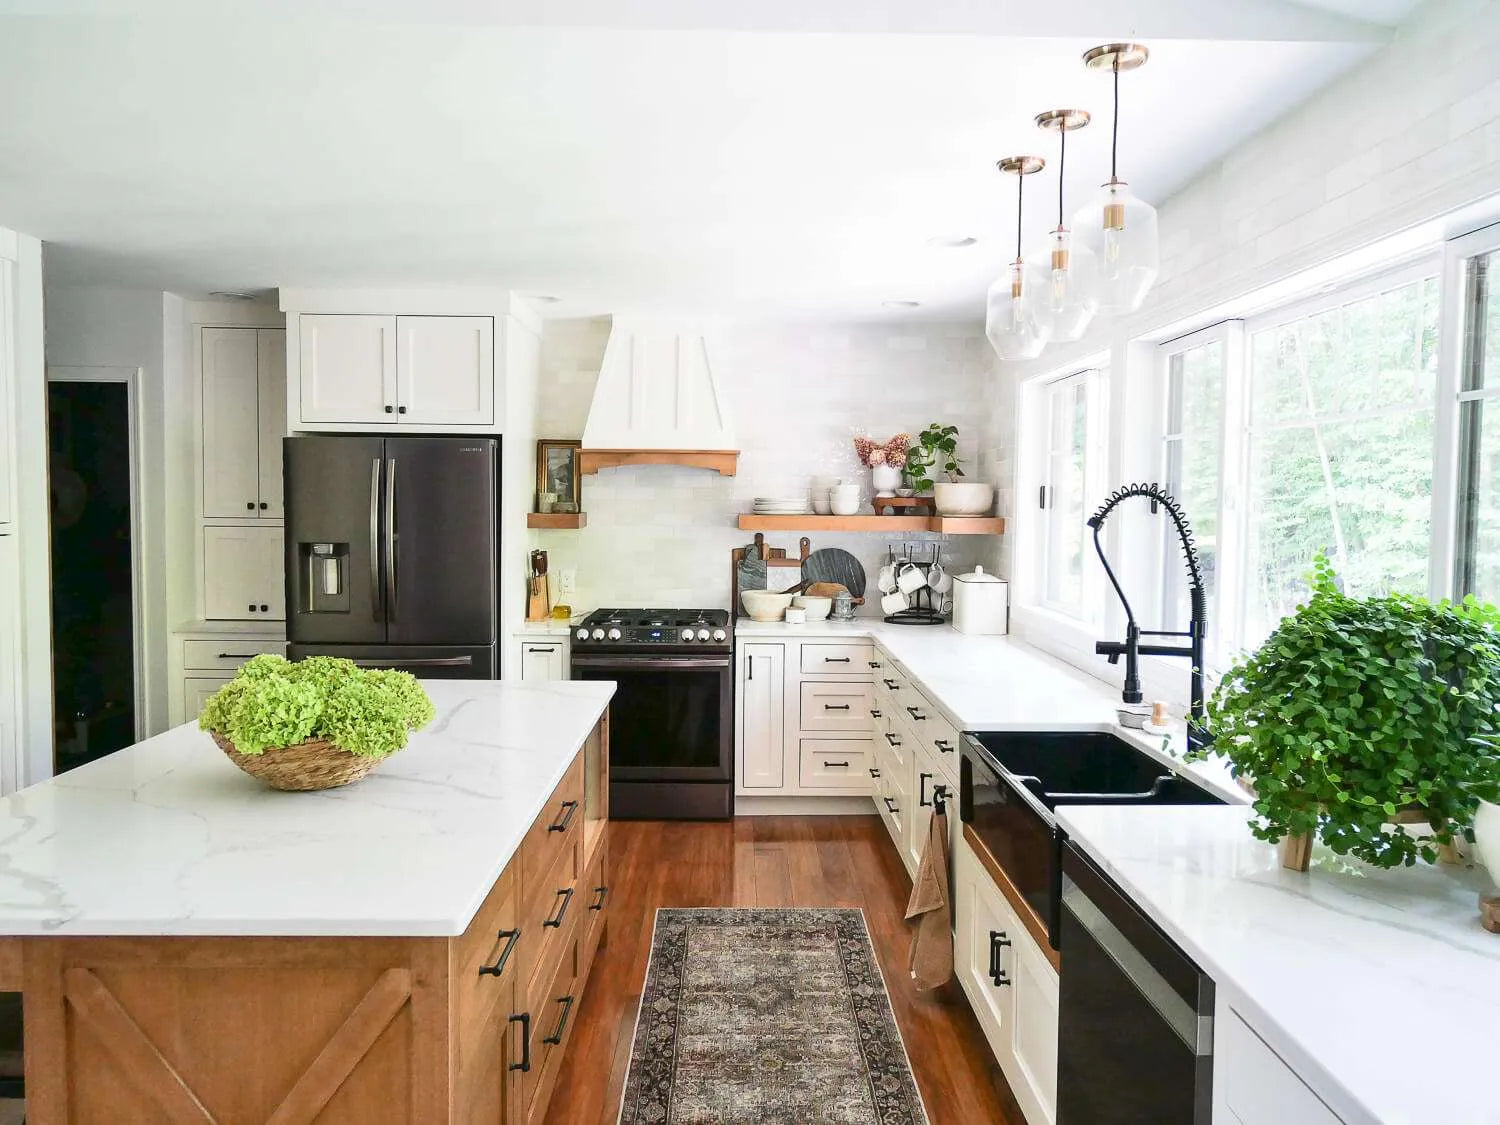 How to Maximize ROI When Remodeling Your Kitchen